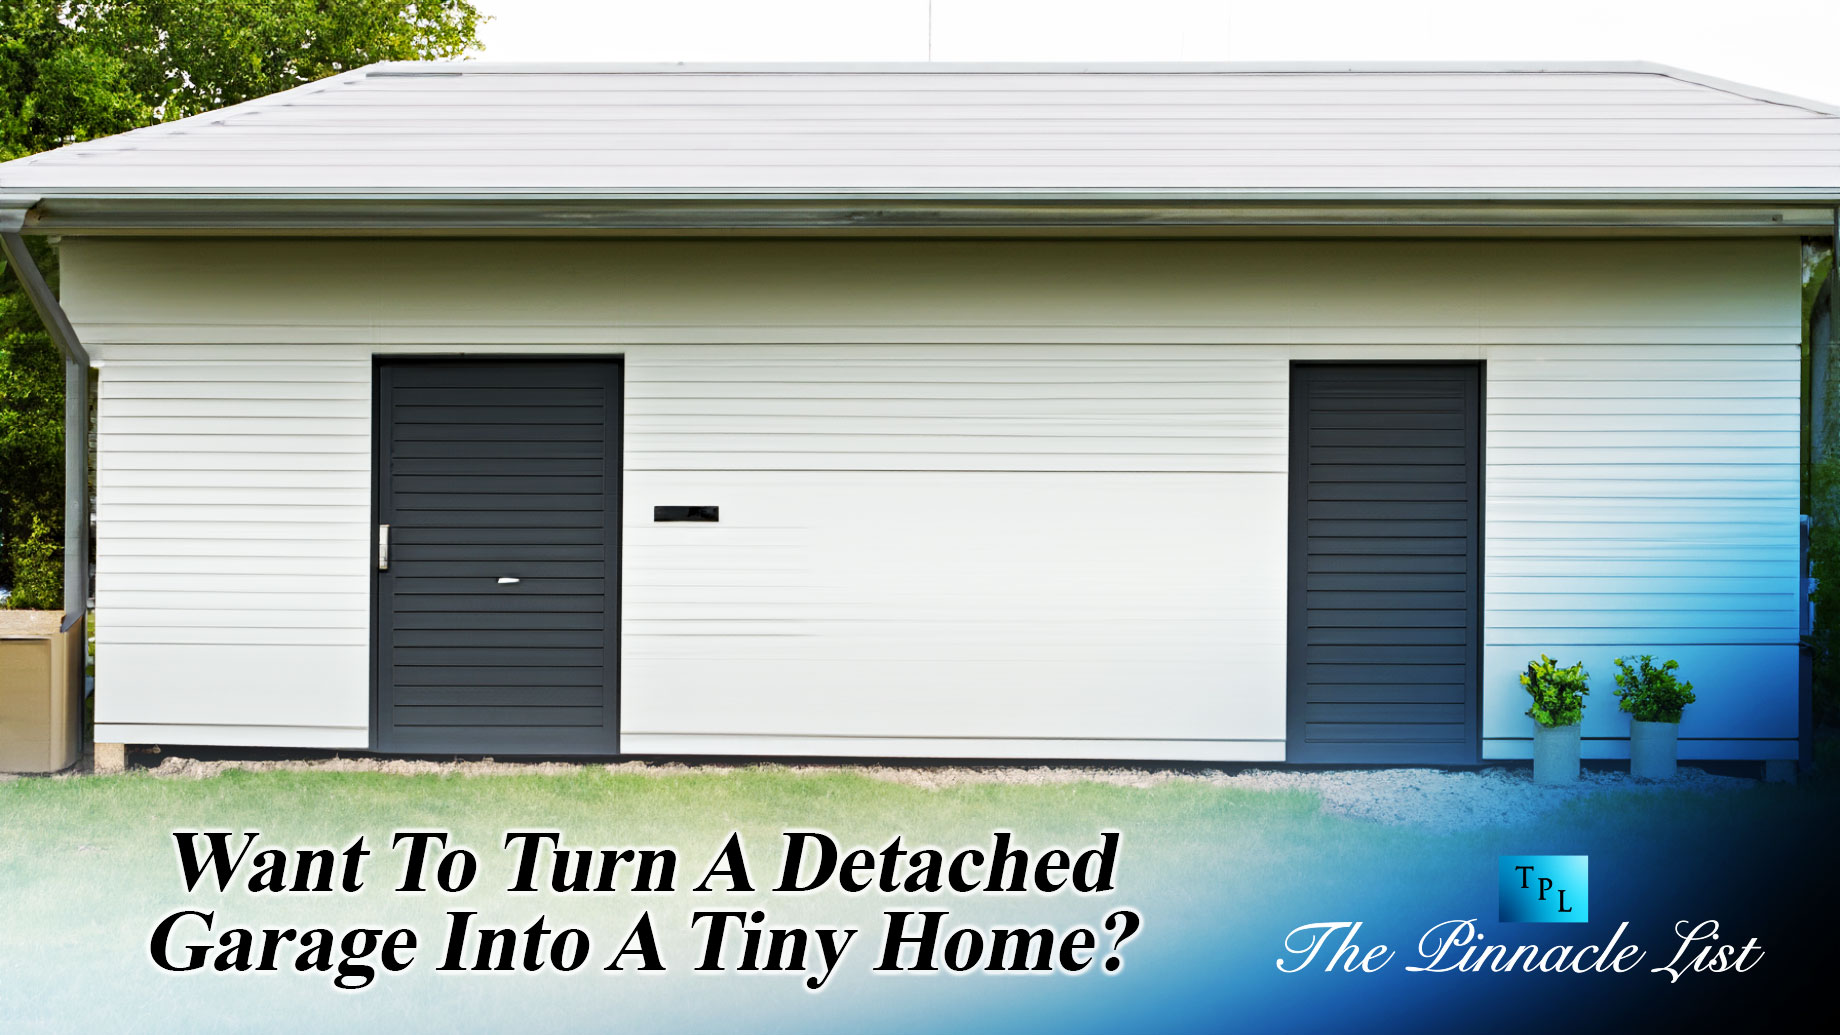 Want To Turn A Detached Garage Into A Tiny Home?